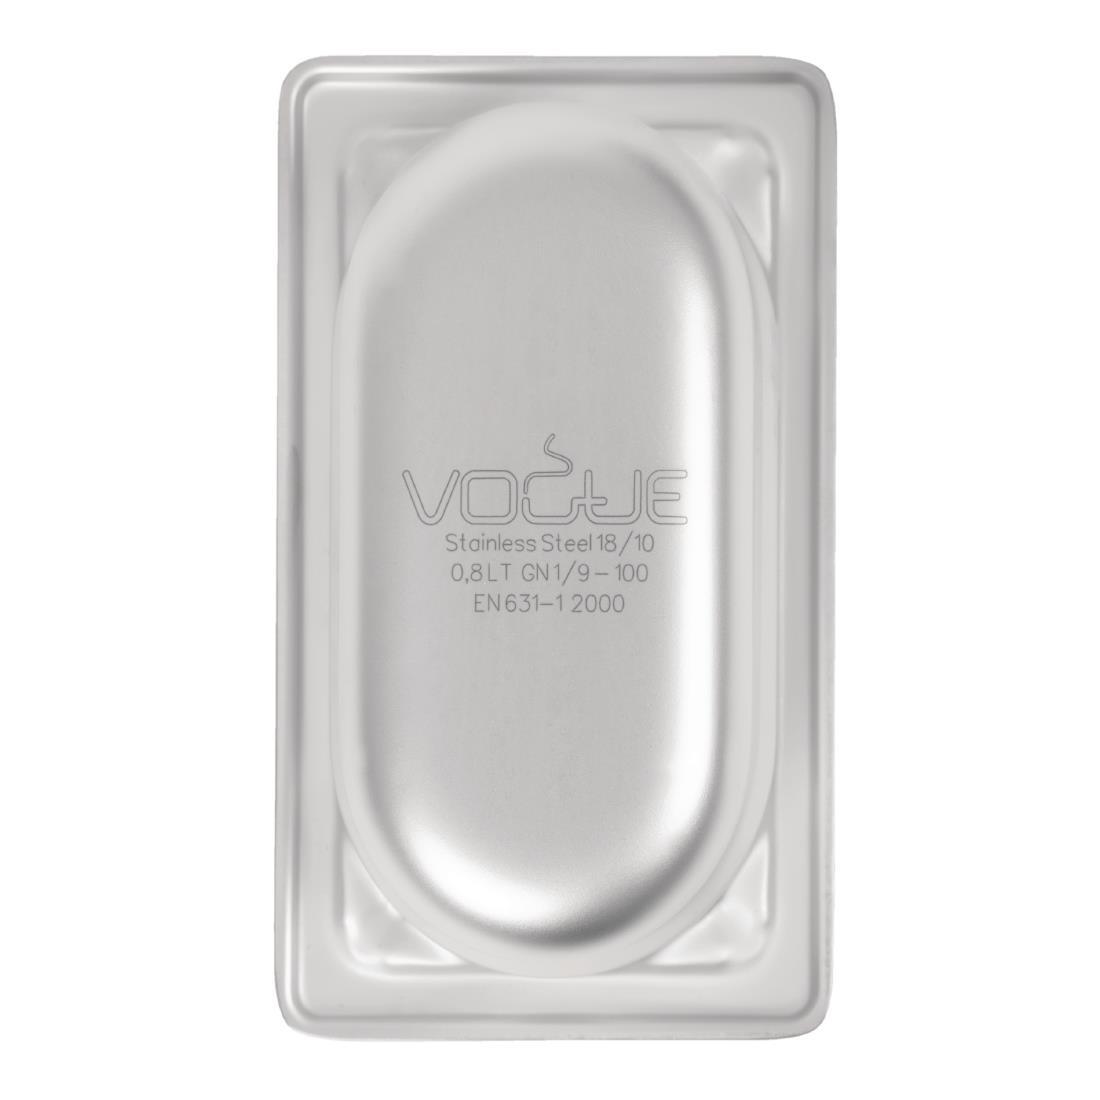 Vogue Heavy Duty Stainless Steel 1/9 Gastronorm Pan 100mm - DW454  - 6